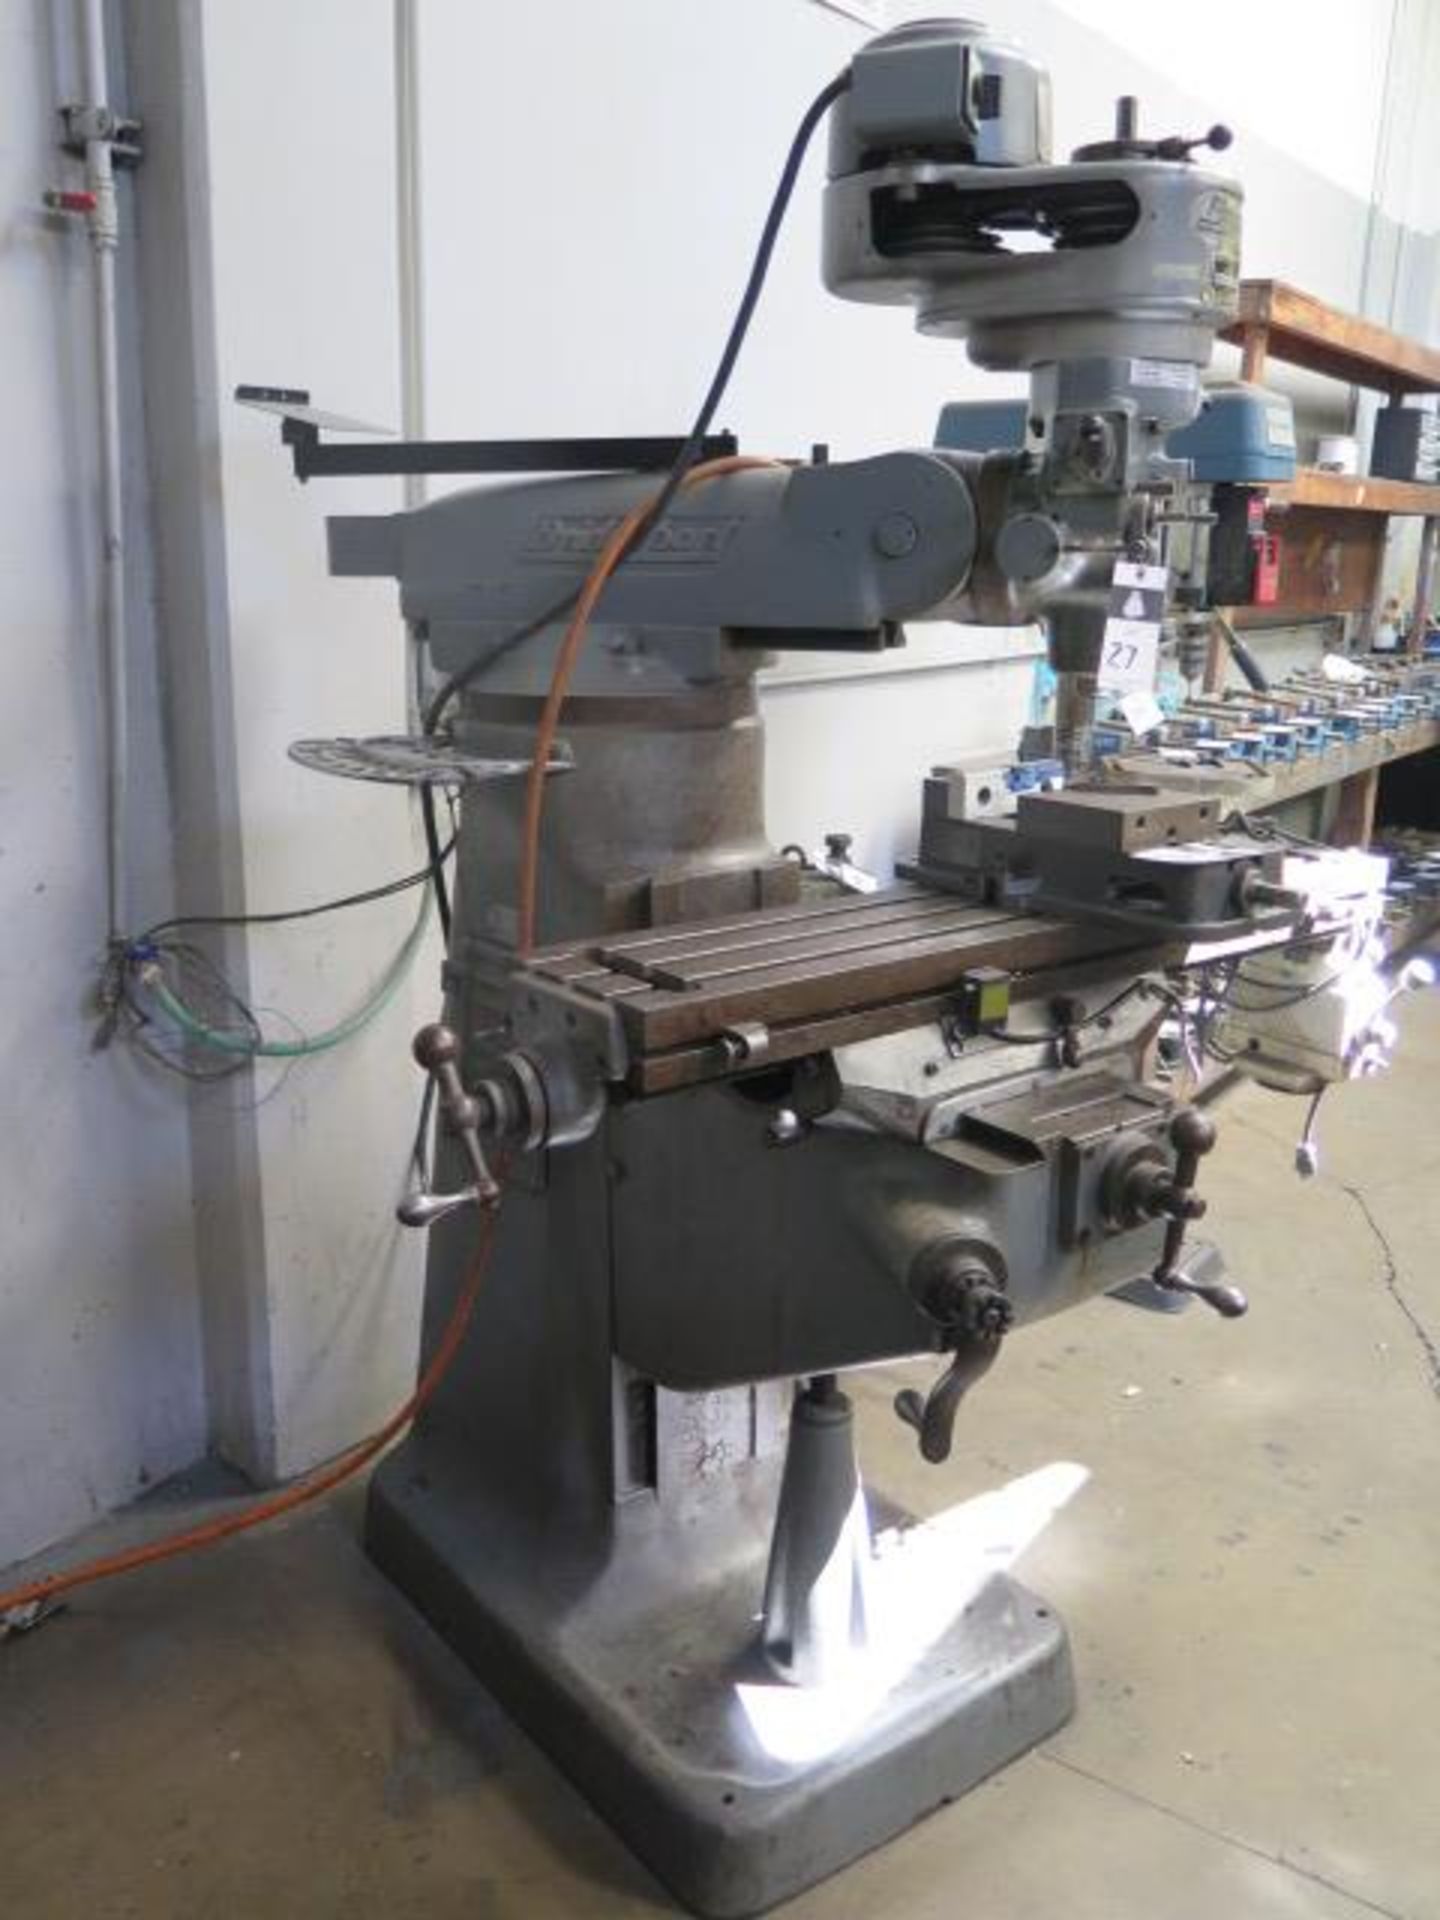 Bridgeport Vertical Mill w/ 80-2720 RPM, 8-Speeds, Power Feed, 9” x 42” Table (SOLD AS-IS - NO